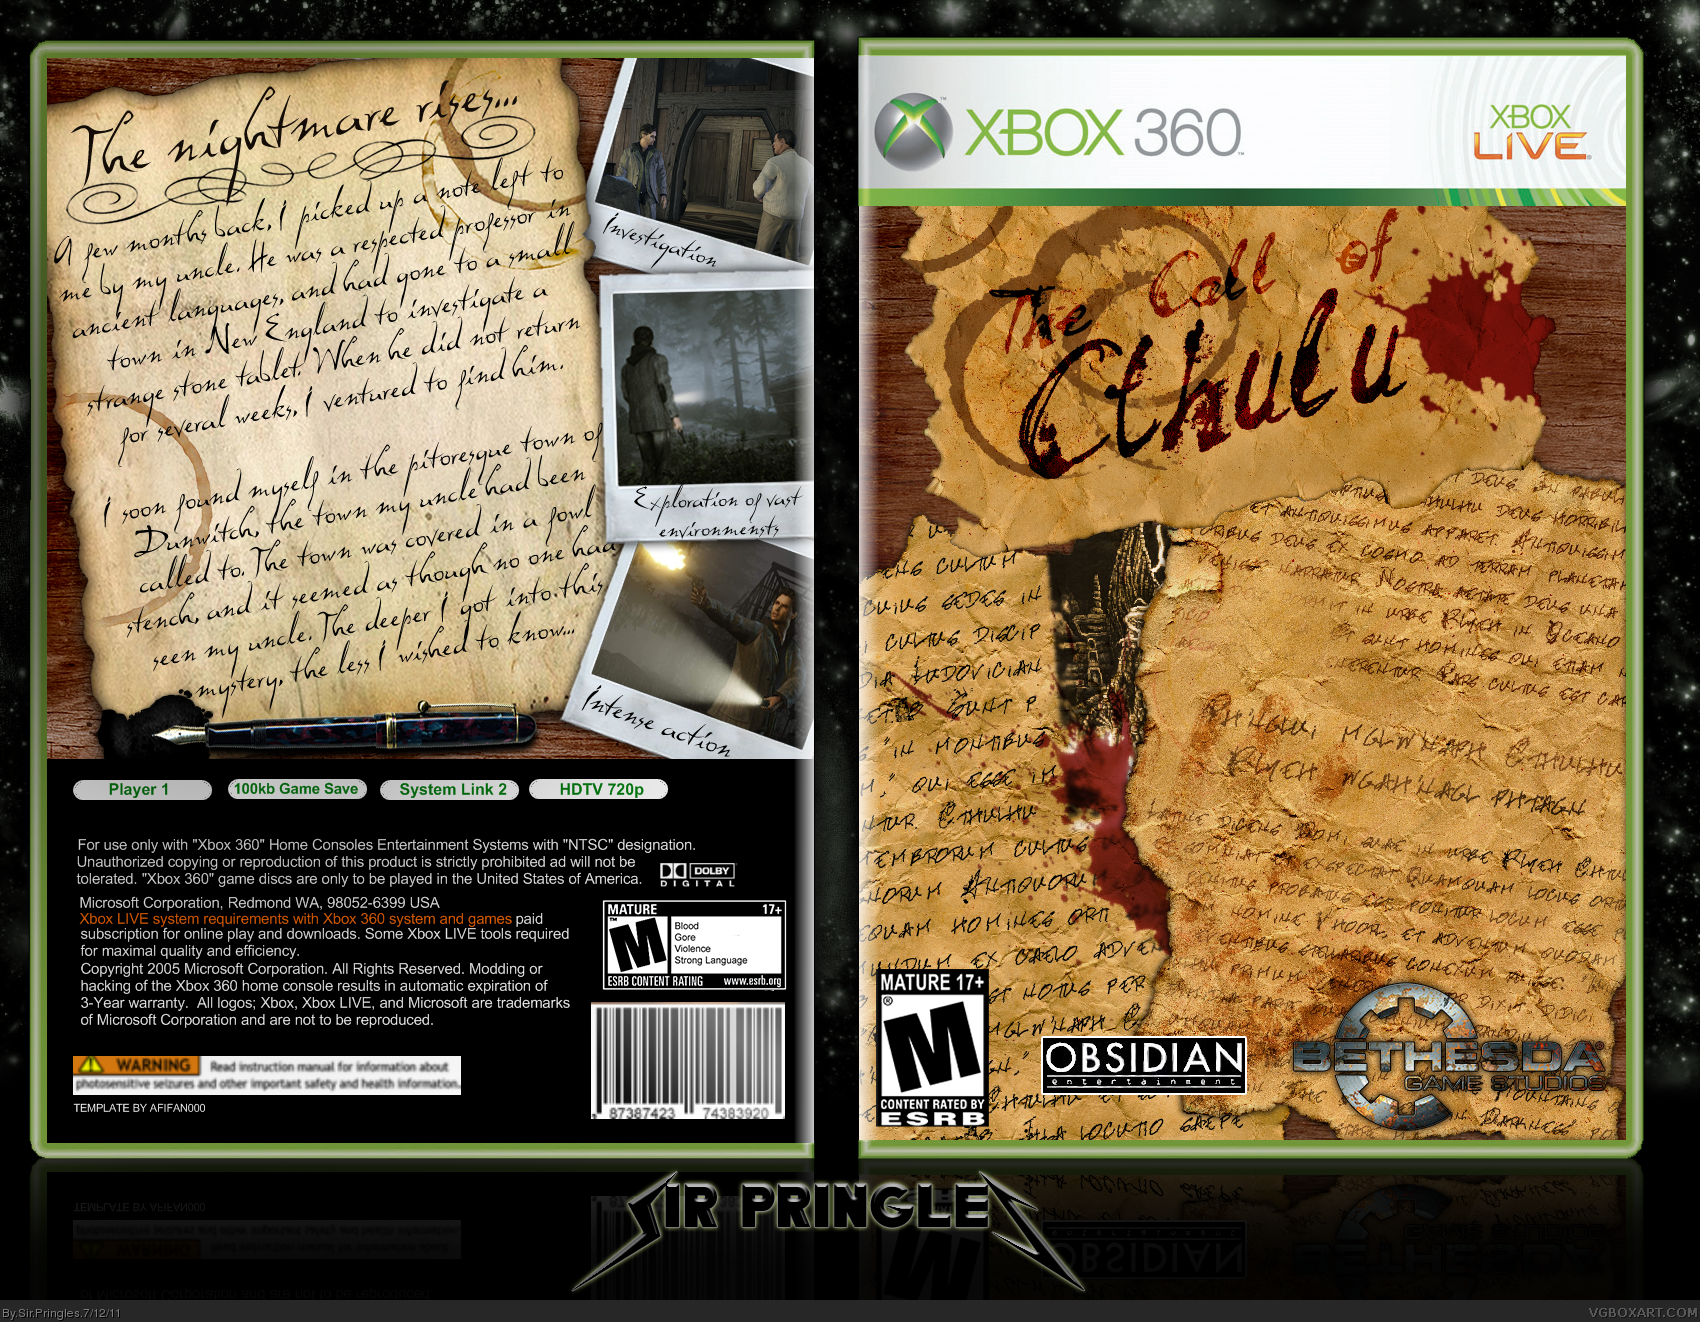 The Call of Cthulu box cover